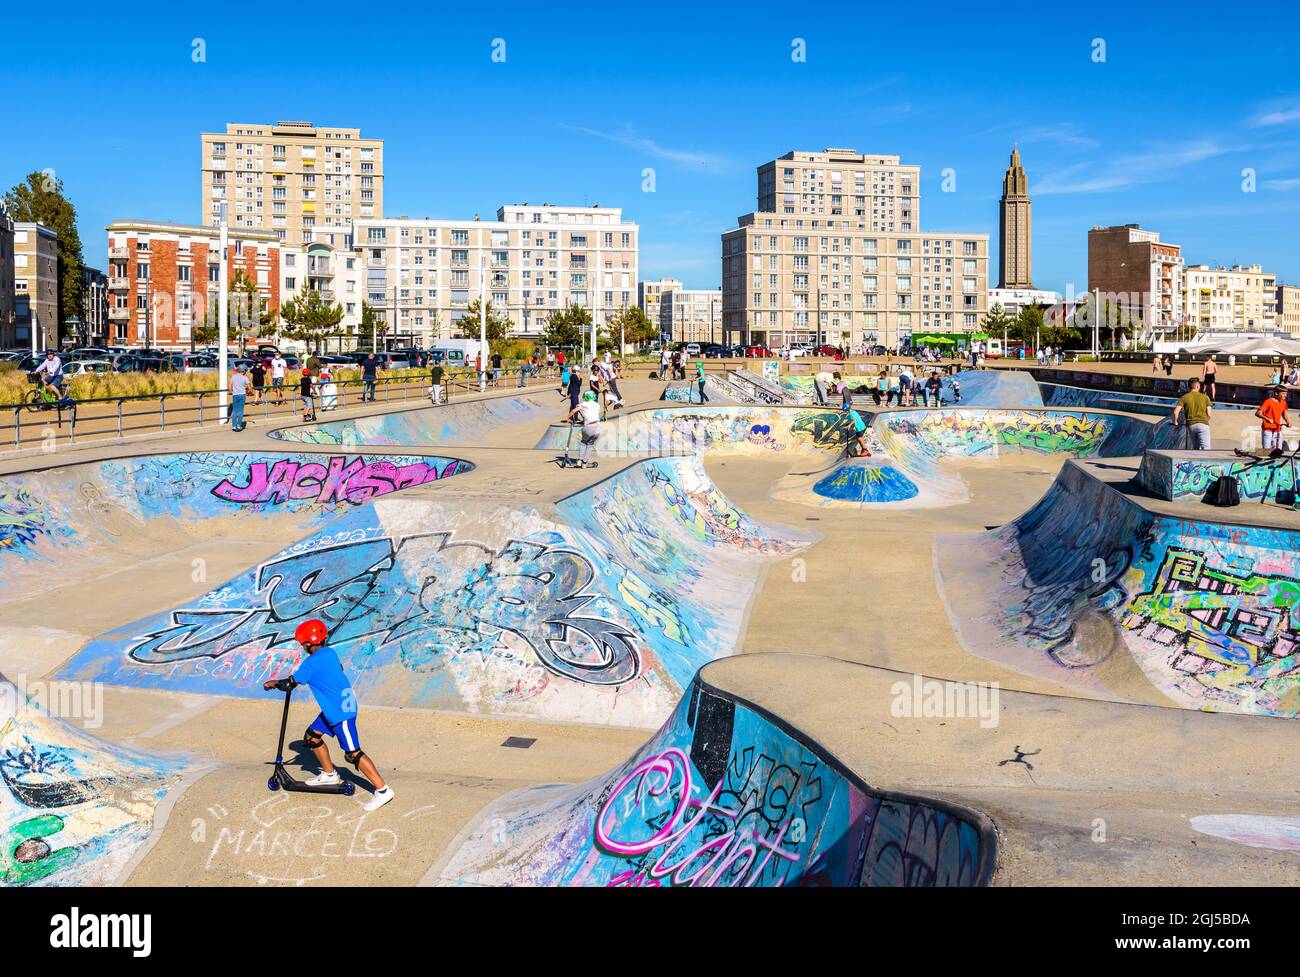 The skatepark and the "Porte Oceane" building complex in Le Havre, France  Stock Photo - Alamy